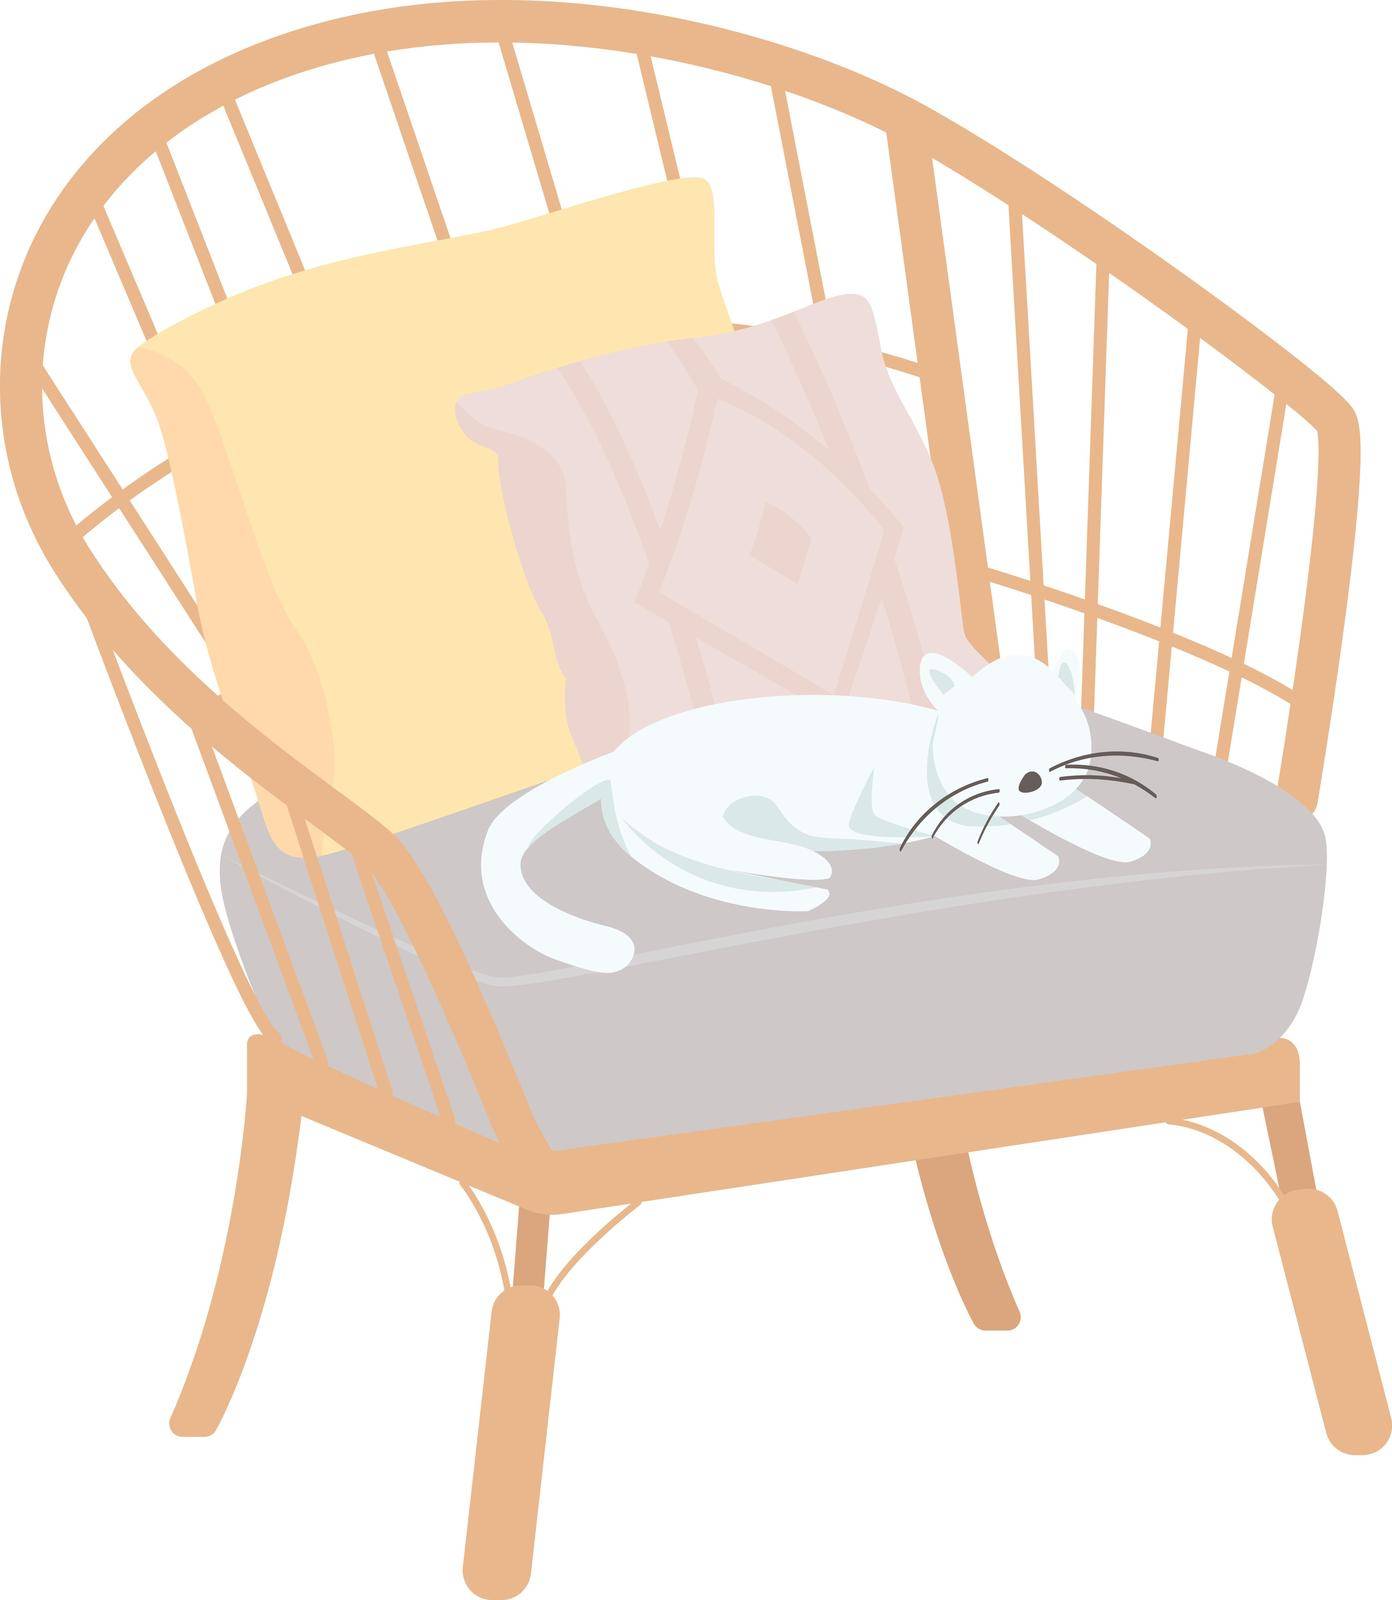 Comfortable armchair with pet semi flat color vector item by ntl